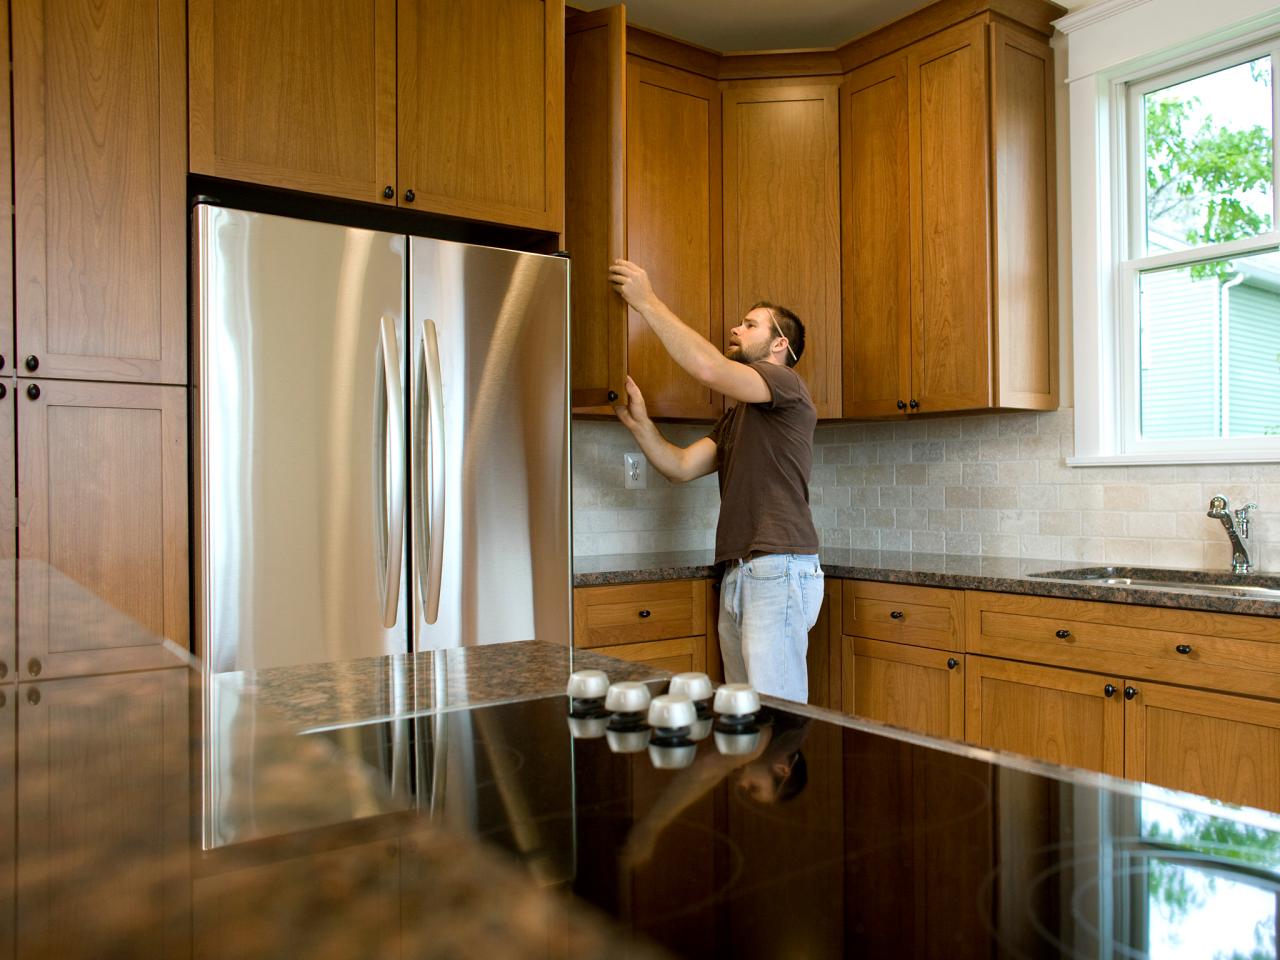 How To Install Kitchen Cabinets, How Much Does It Cost To Install Kitchen Cabinets In California